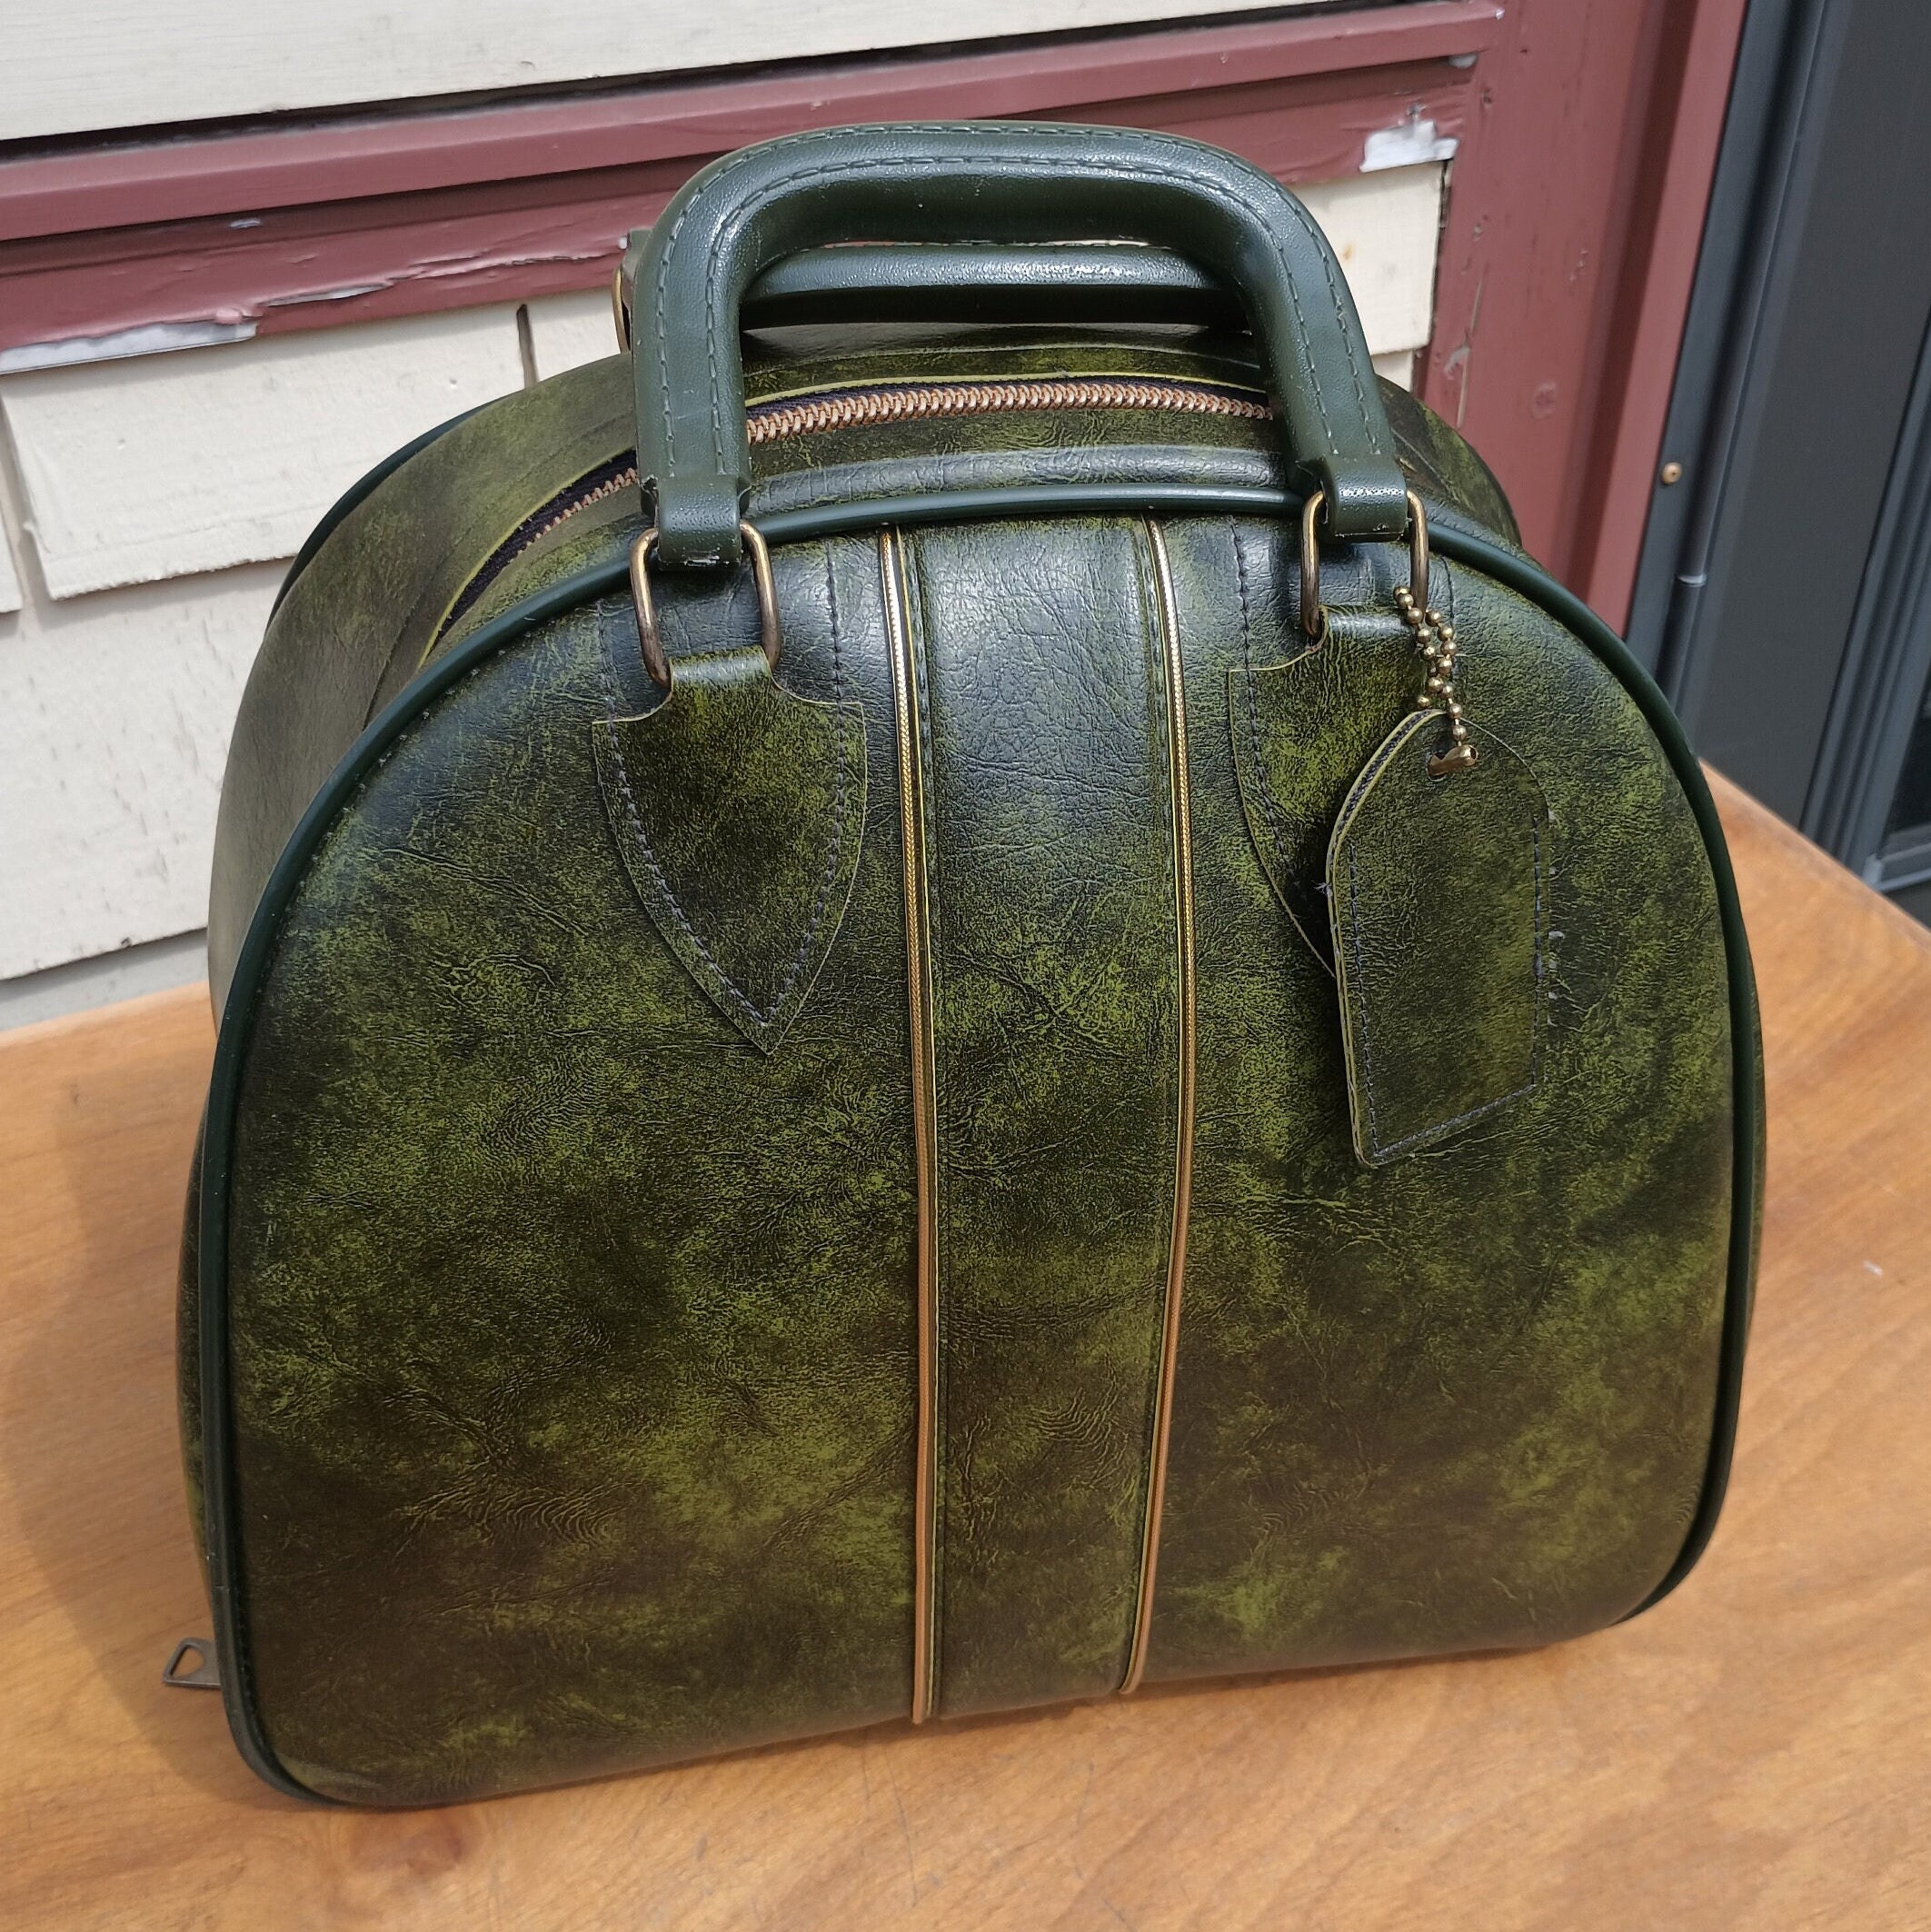 Vintage Green Bowling Ball Bag, Sporting Goods, Vintage Bags, Bowling  Accessories